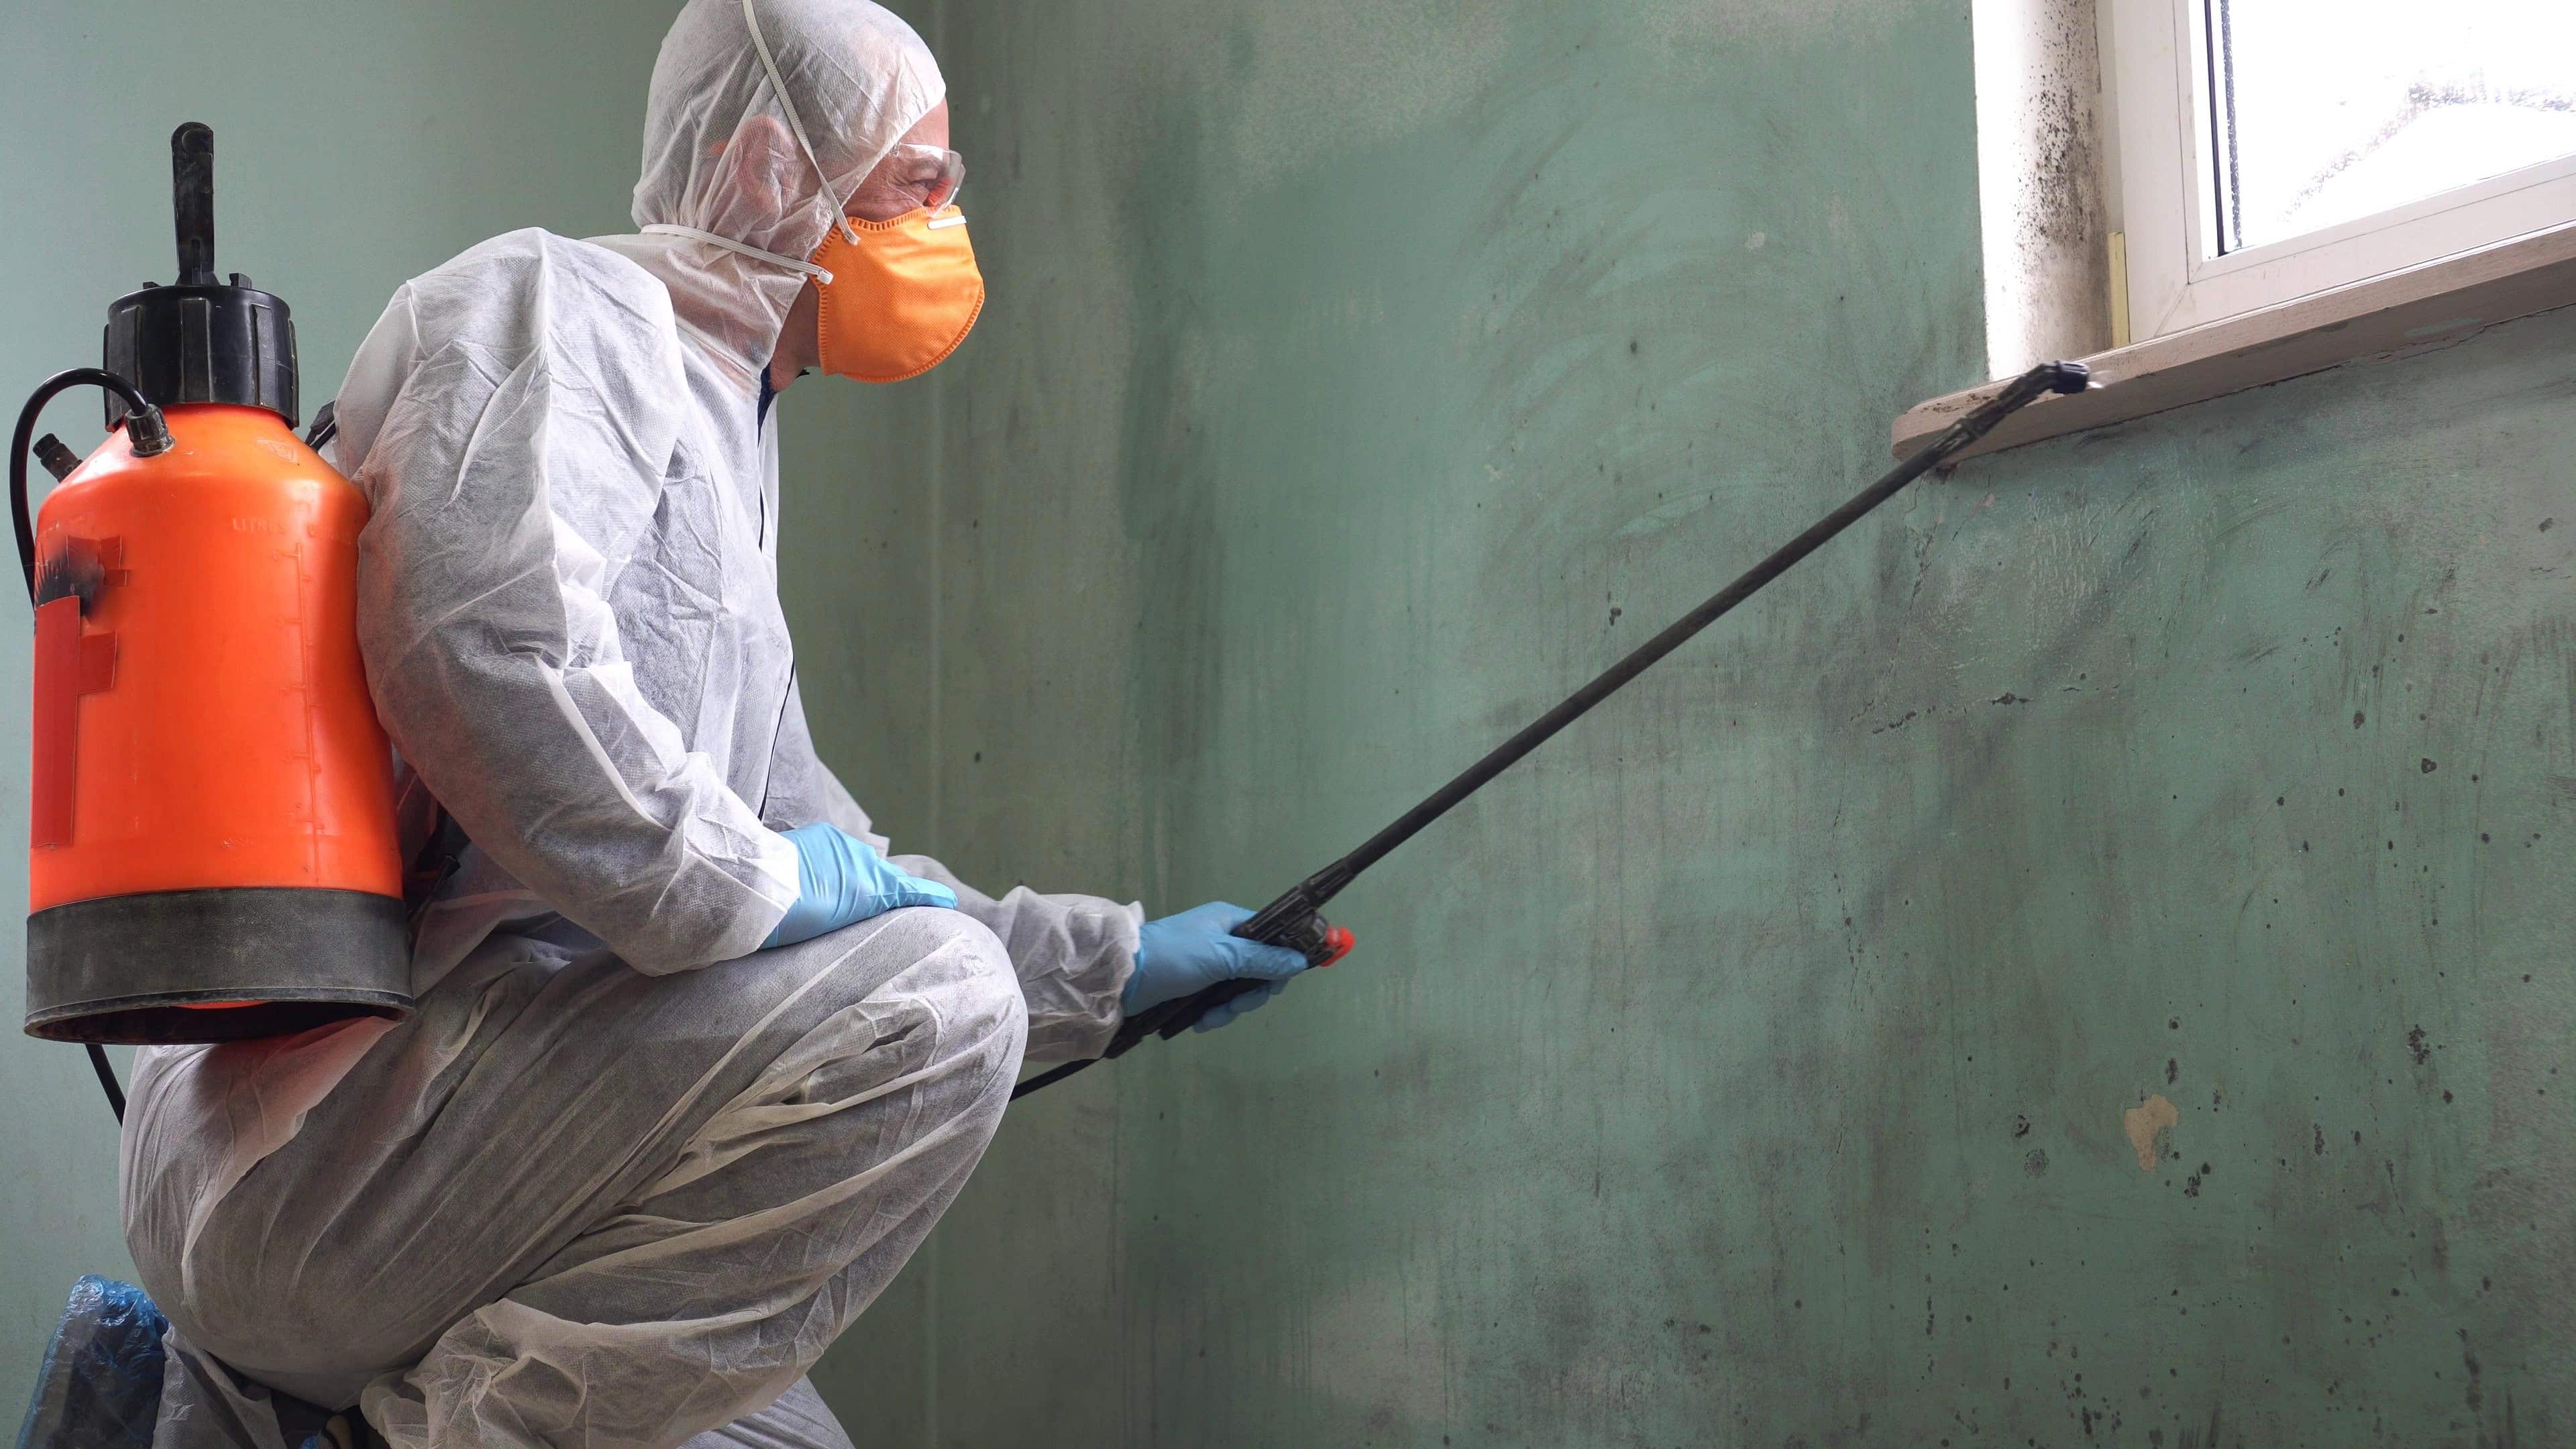 Having a professional remediation company is import to the safe and effective treatment of black mold